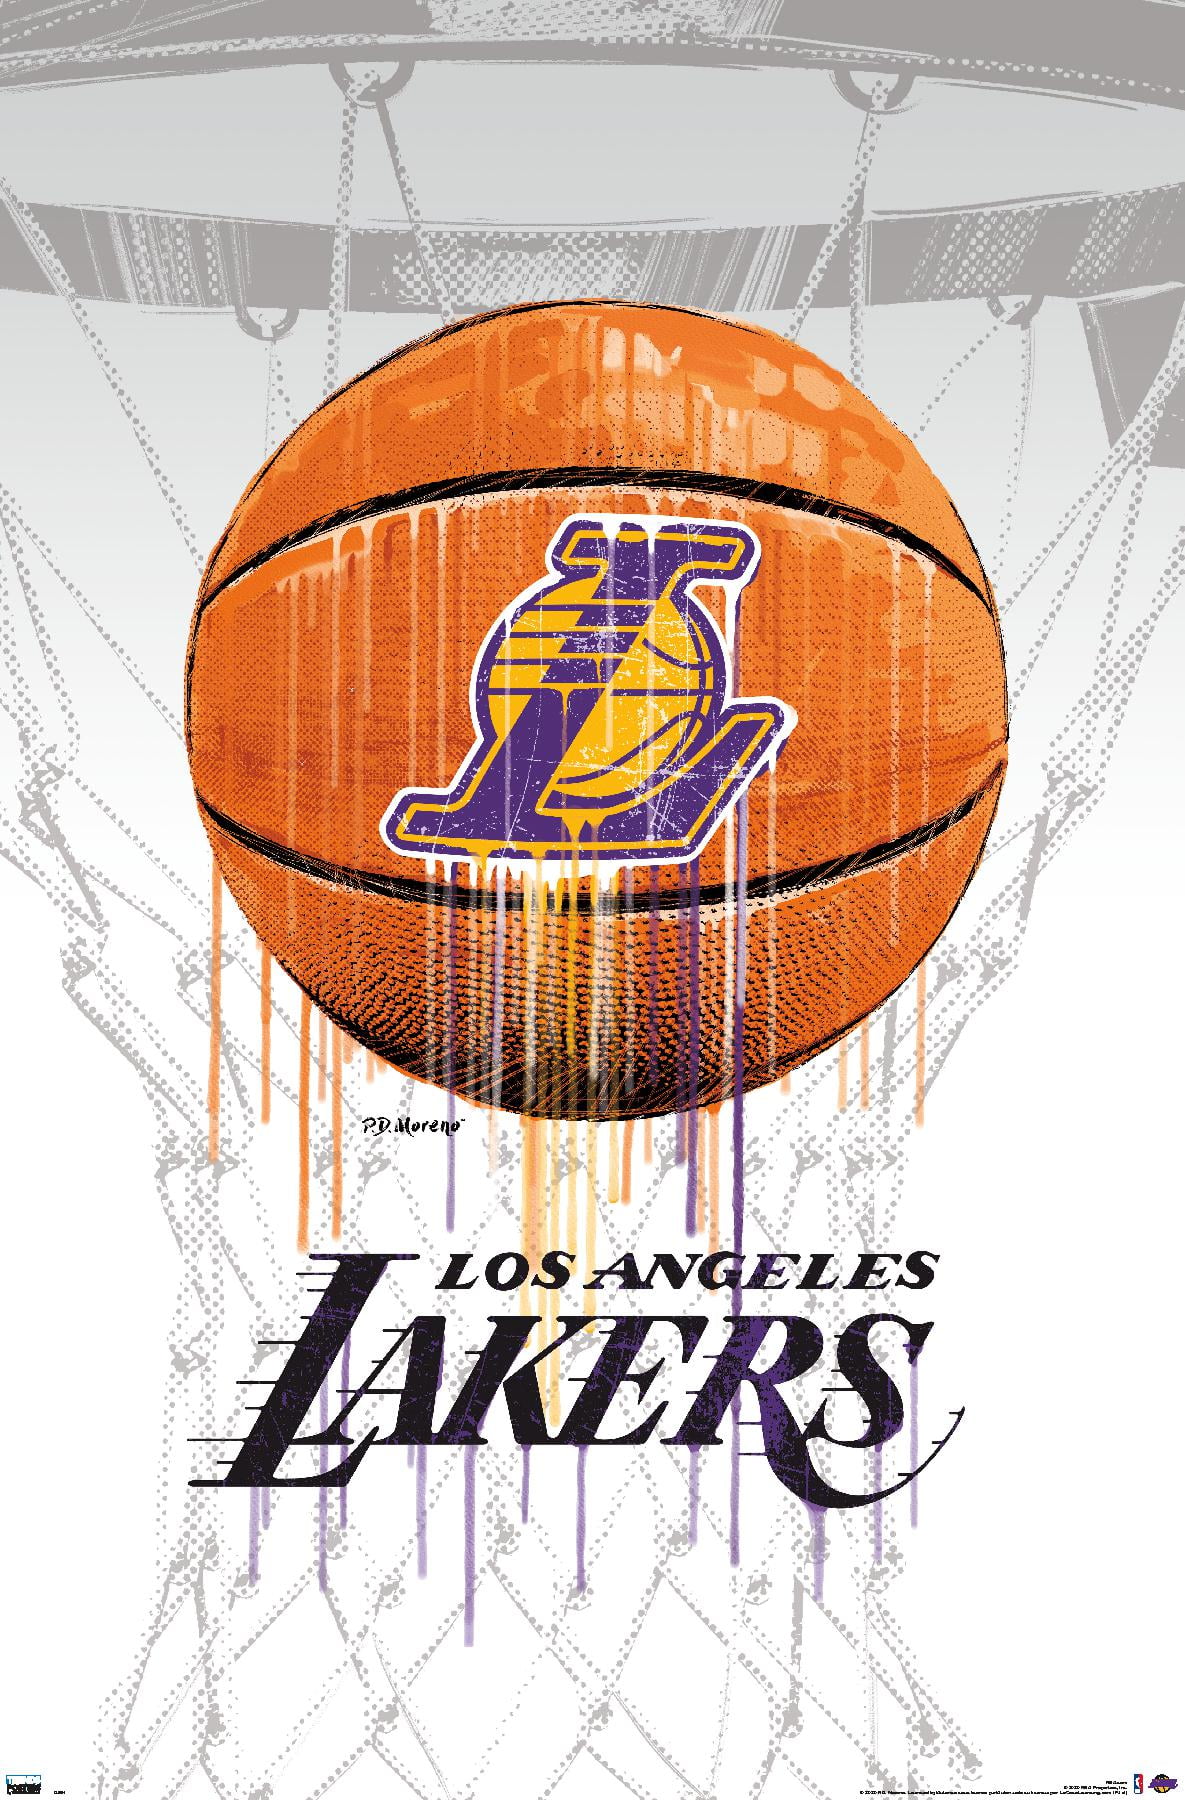 Lakers Baby In Nba Fan Apparel & Souvenirs for sale